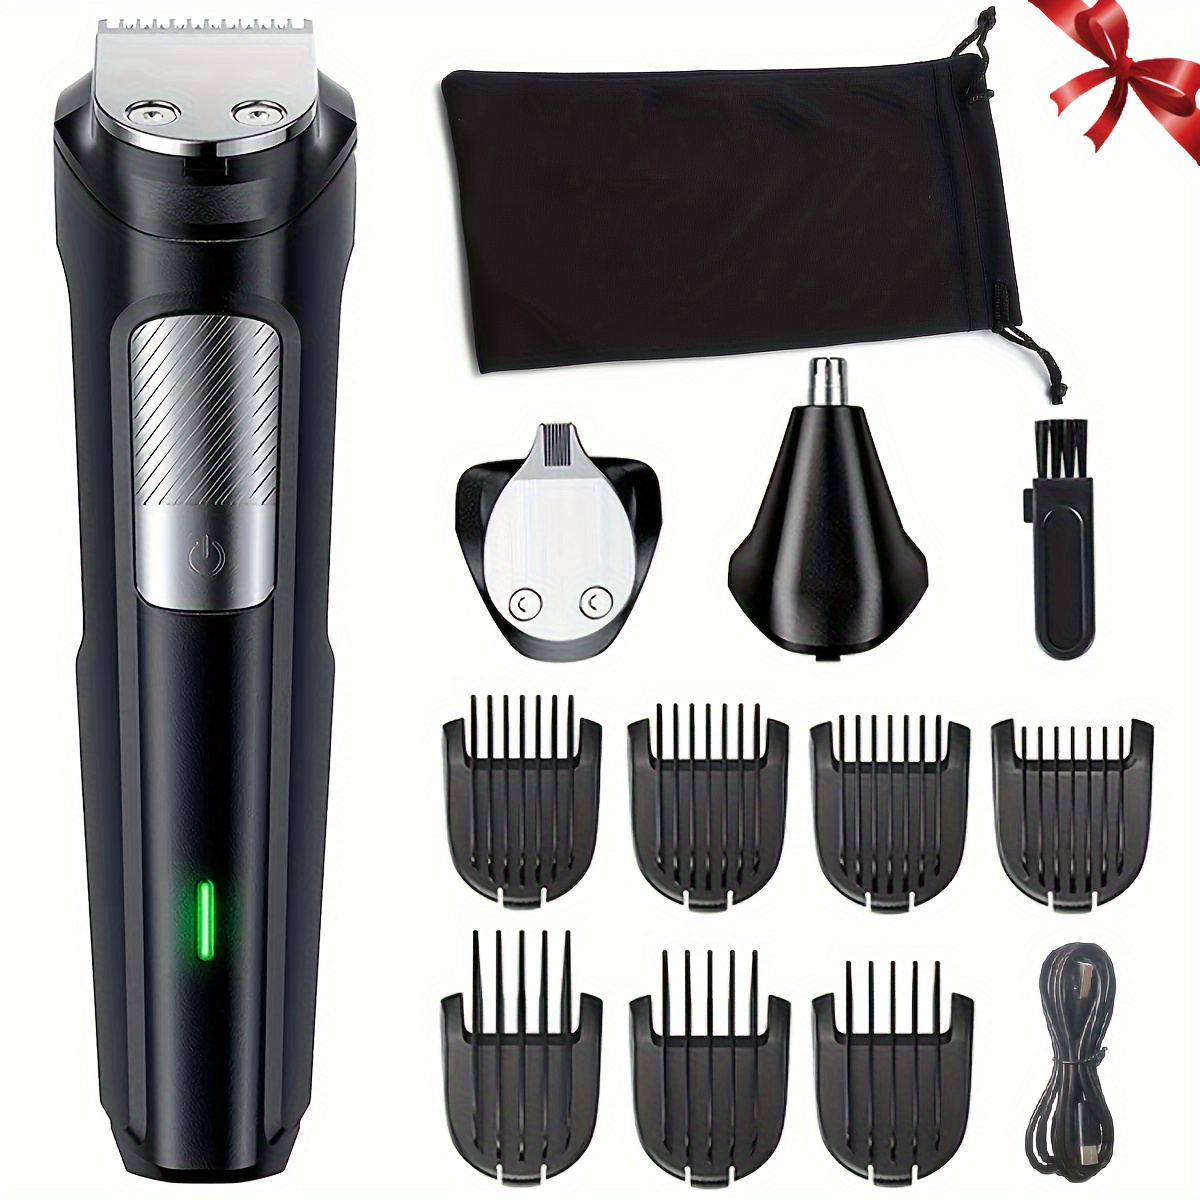 

3-in-1 Beard Trimmer Hair Clipper Nose Hair Trimmers, Usb Rechargeable All-in-one Hair Grooming Kit For Men, Gift Set, Father's Day Gift Father's Day Gift